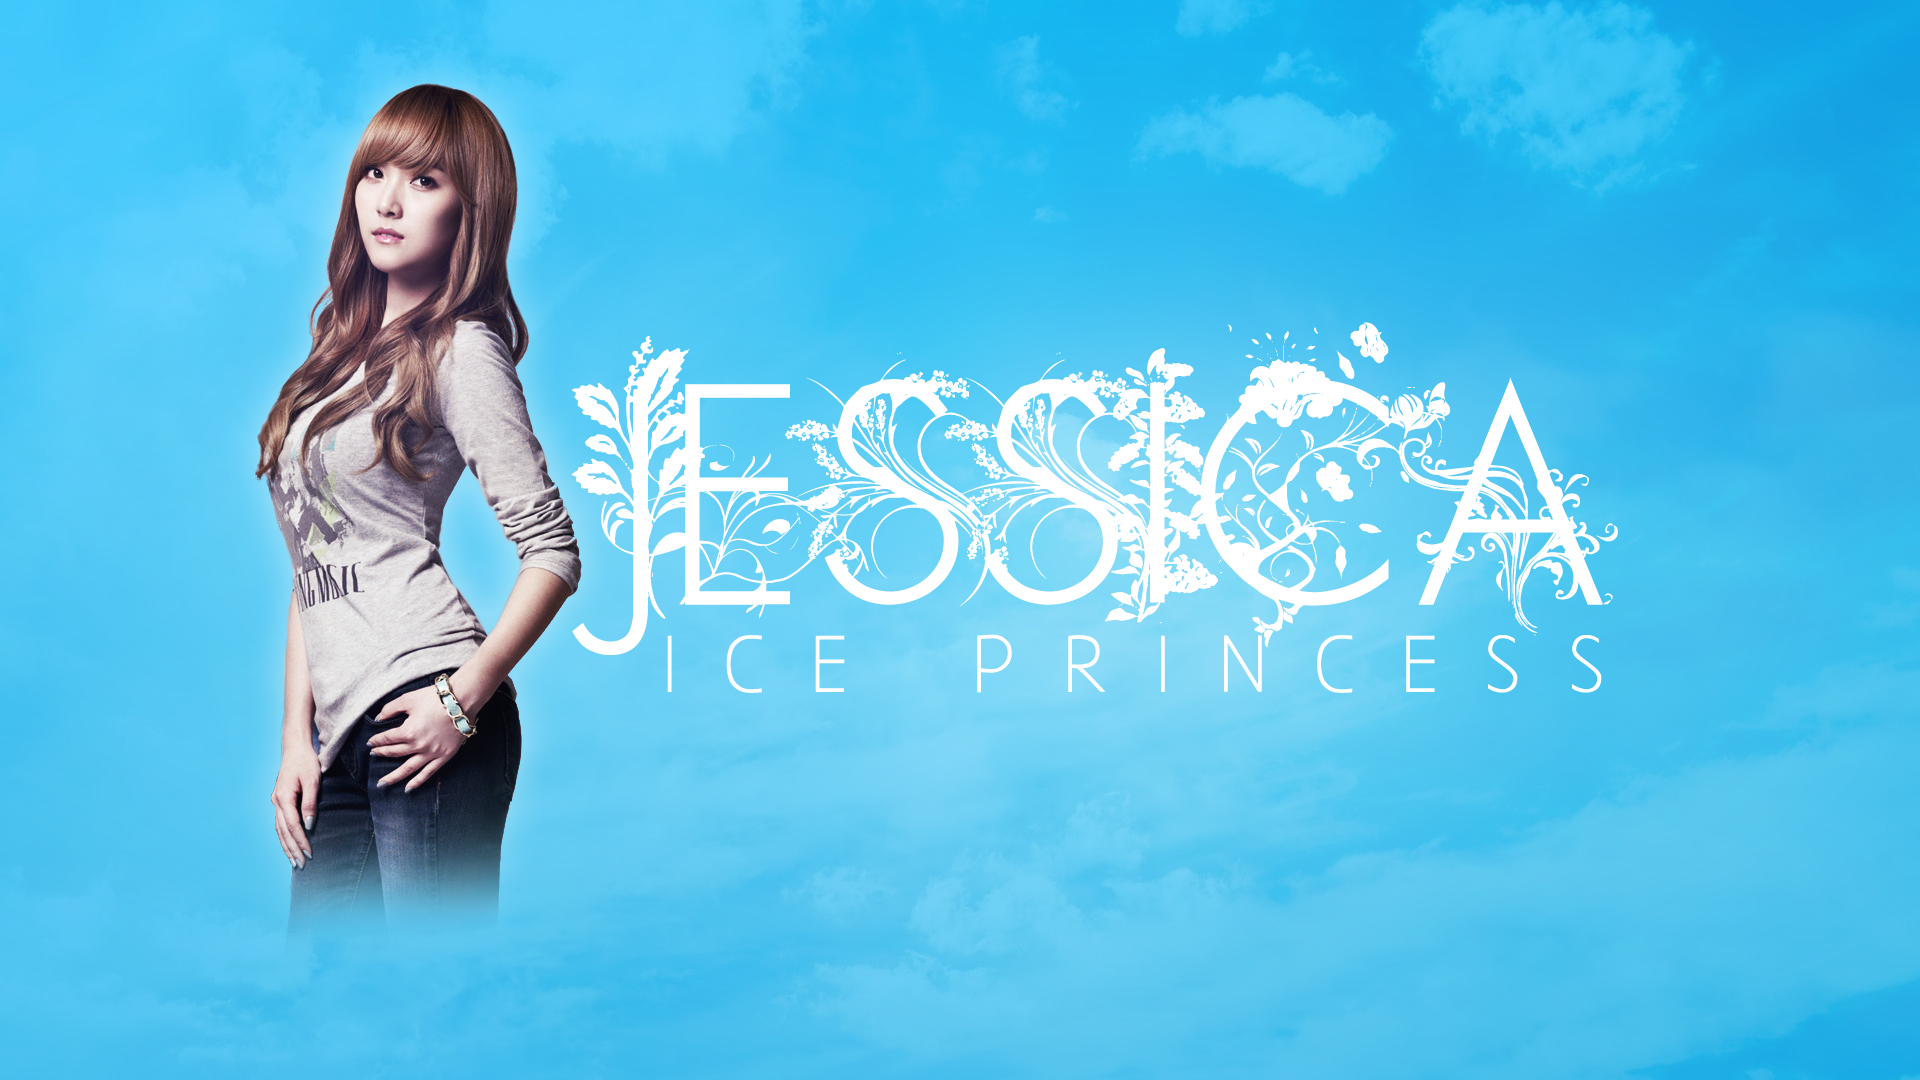 jessica__snsd__wallpaper__1_by_ninquo-d7